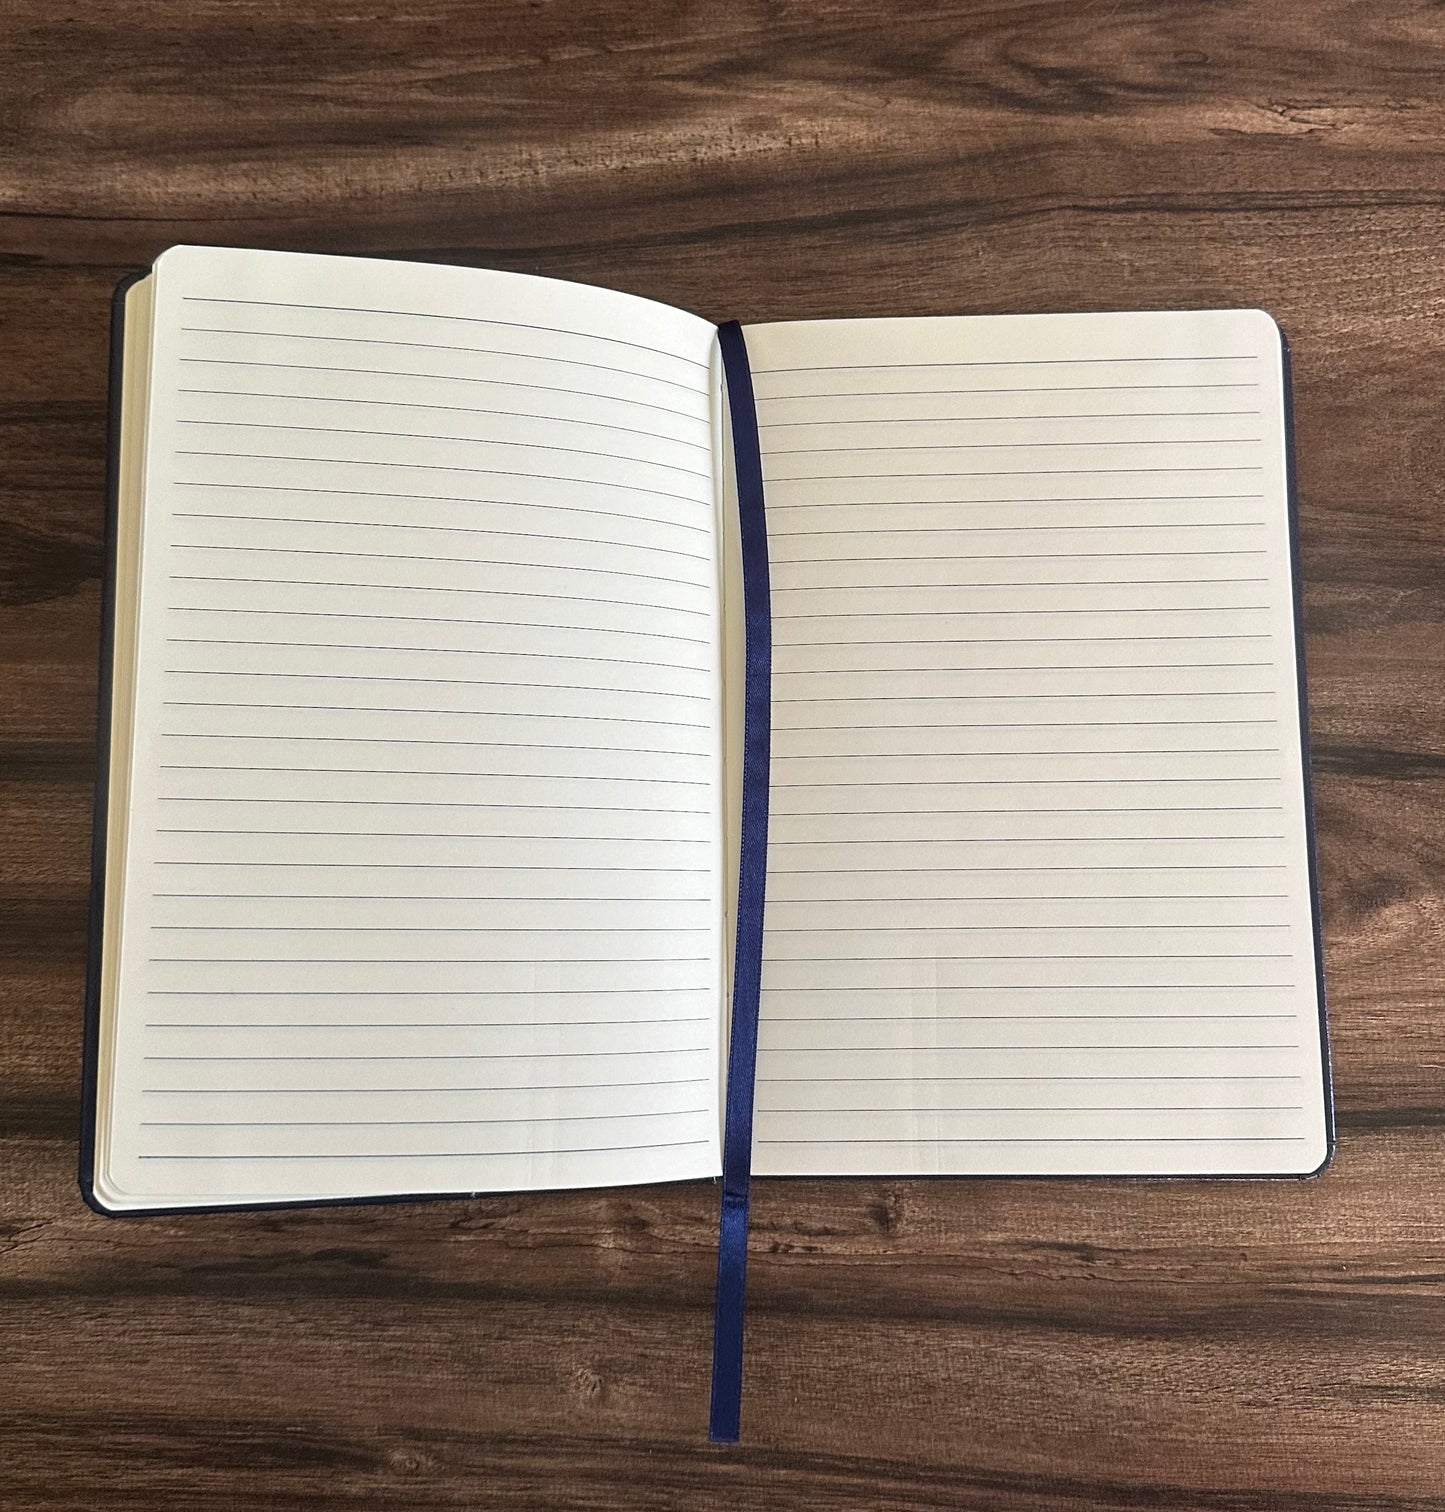 Serve First hardcover notebook